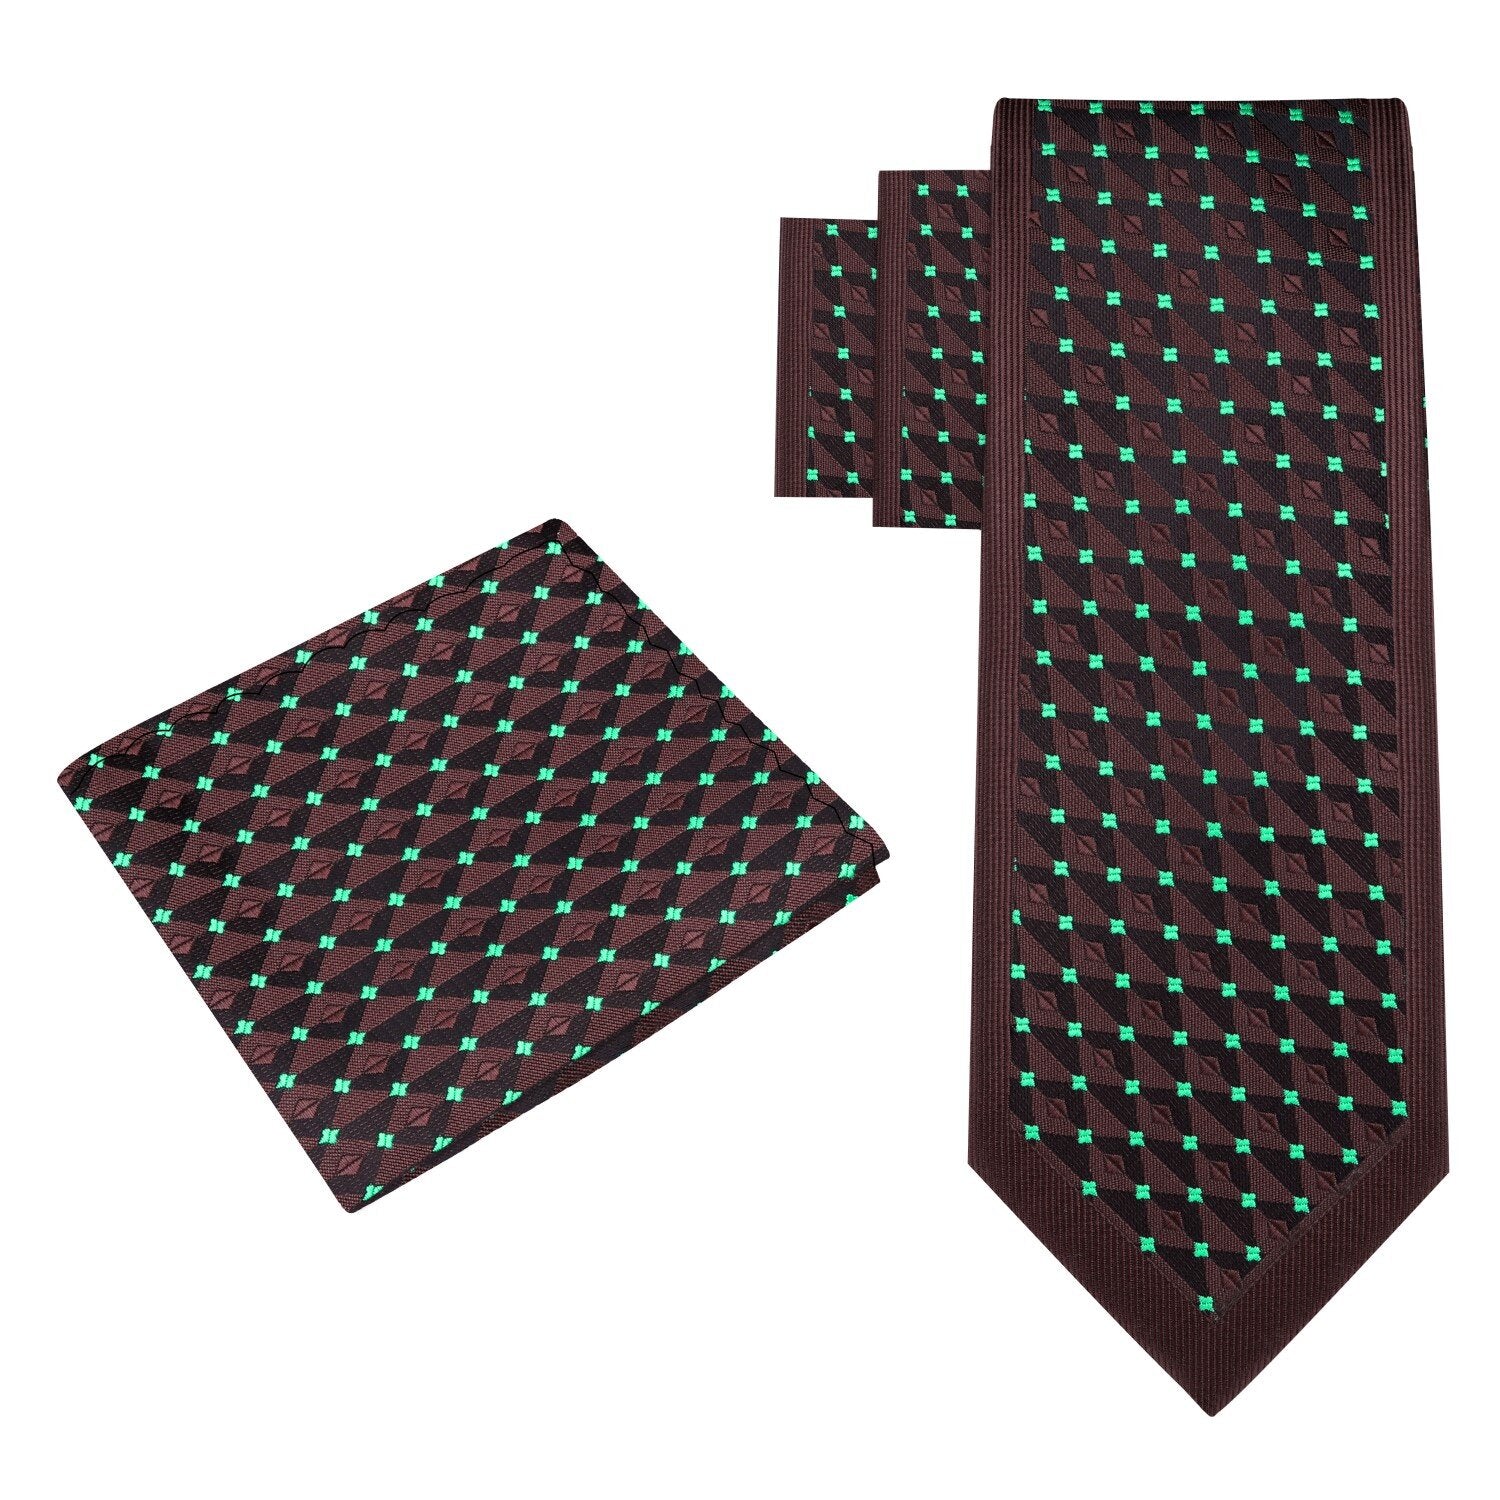 Alt View: Chocolate and Mint Green Geometric Tie and Pocket Square